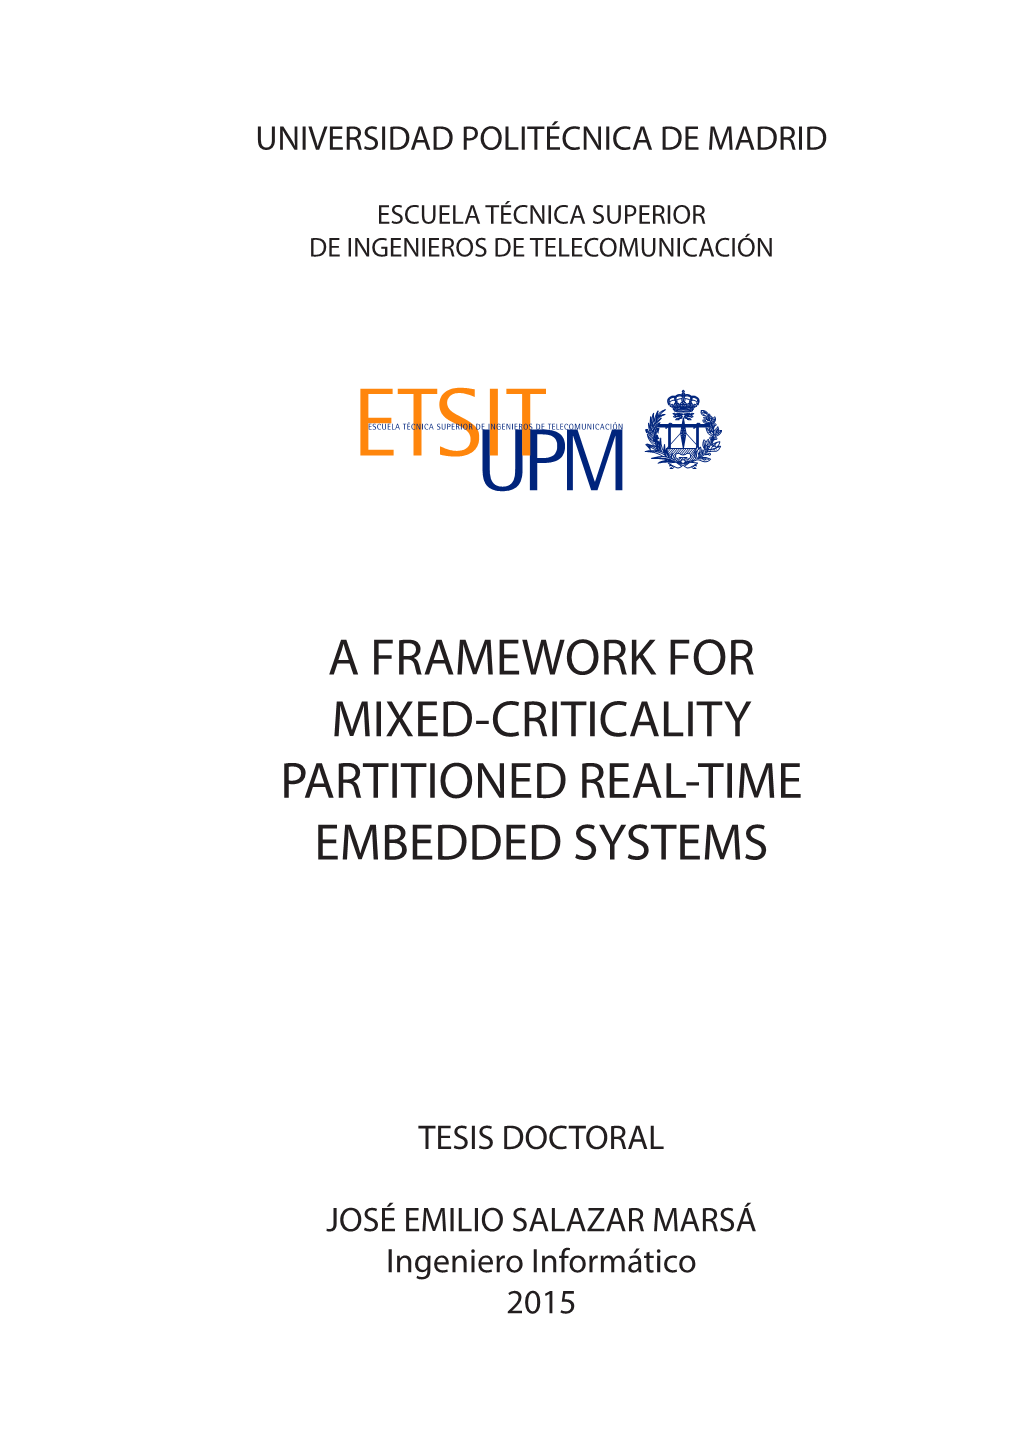 A Framework for Mixed-Criticality Partitioned Real-Time Embedded Systems